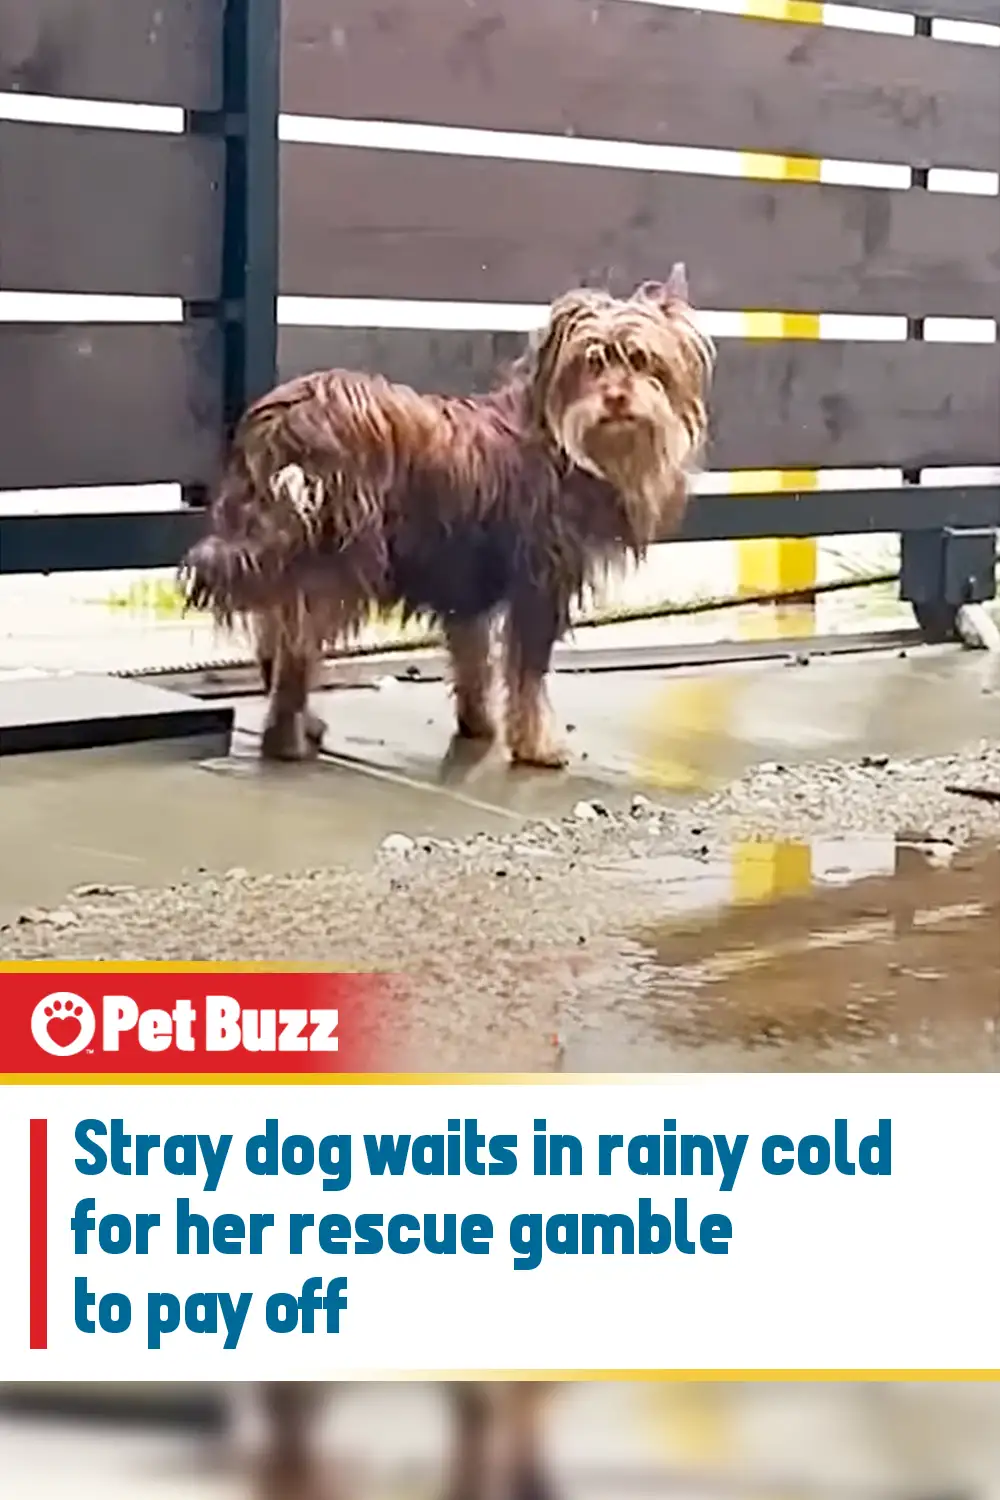 Stray dog waits in rainy cold for her rescue gamble to pay off